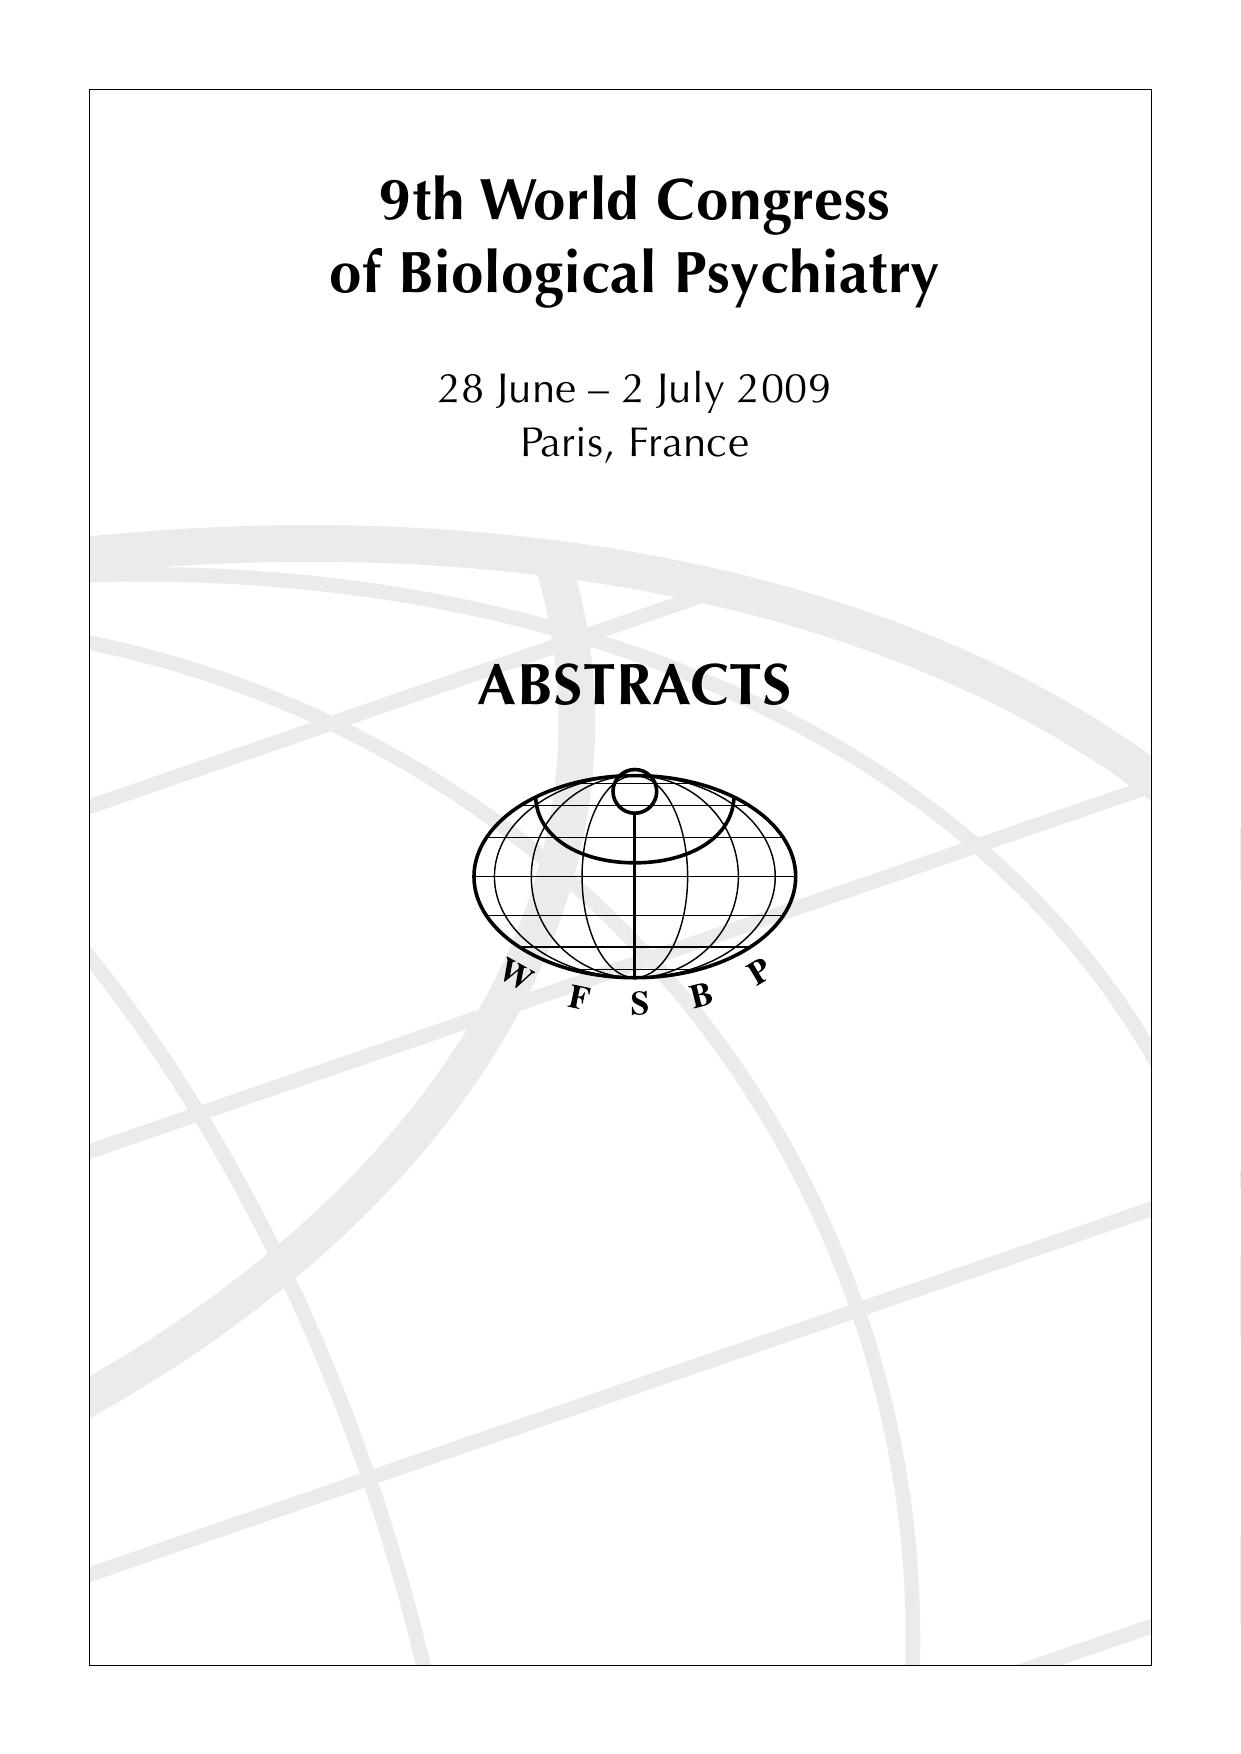 Abstracts of the 9th World Congress of Biological Psychiatry